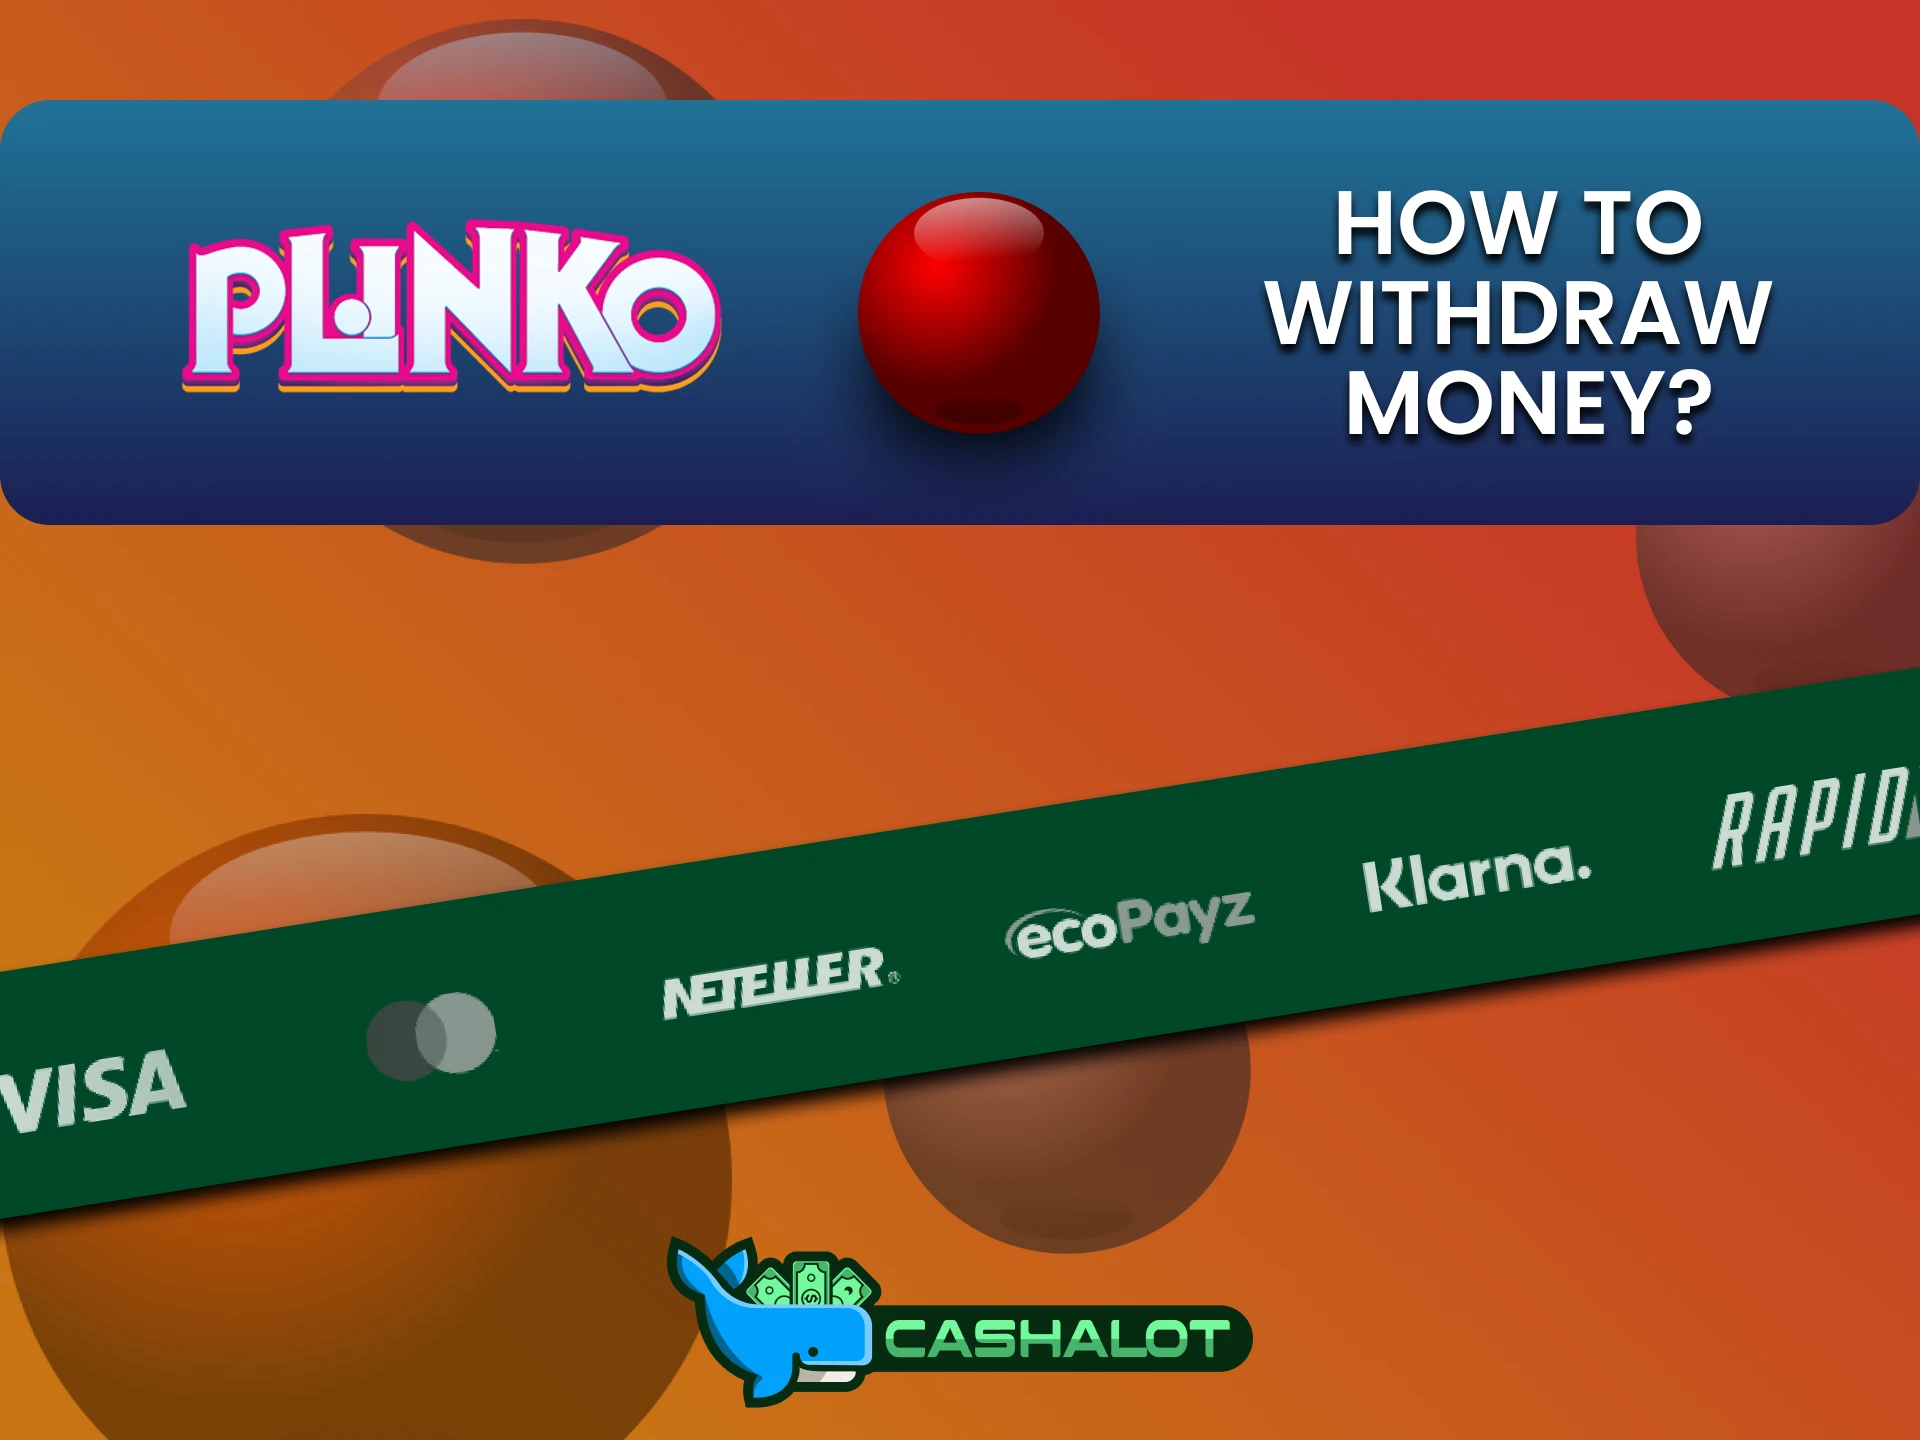 Learn how to withdraw funds on the Cashalot website for the game Plinko.